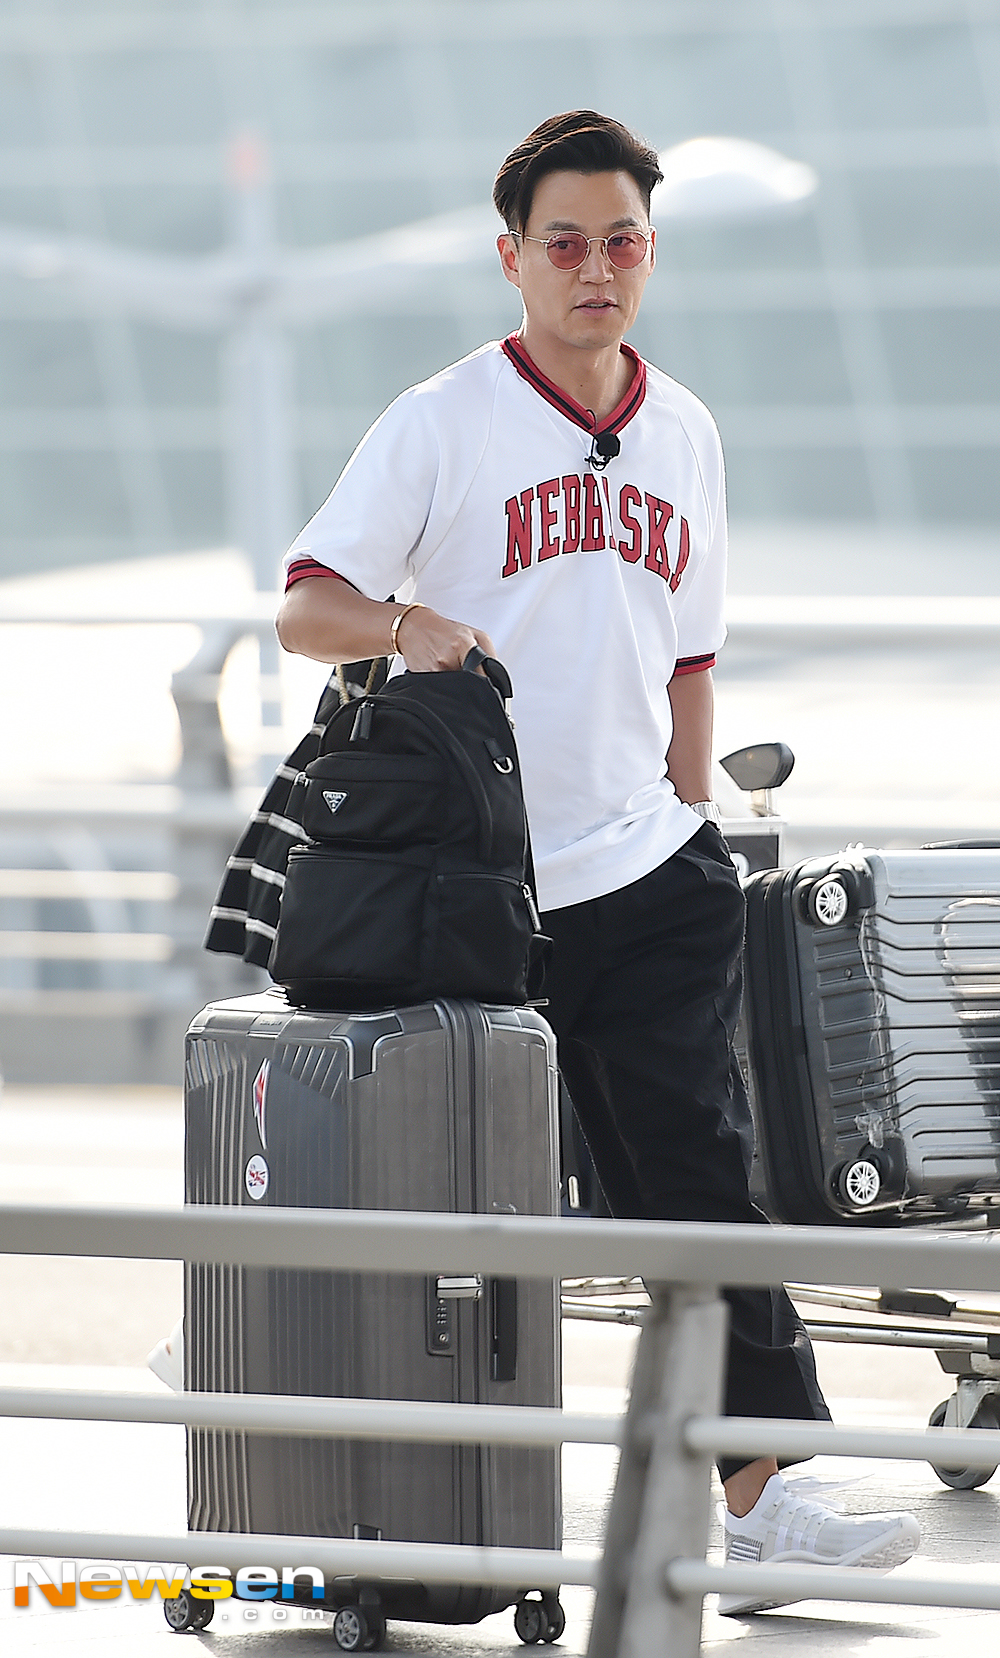 Actors Lee Soon-jae, Shingu, Baek Il-seob, Park Geun-hyung, Kim Yong-gun and Lee Seo-jin left for Germany via Helsinki via Incheon International Airport on June 4th, on a schedule of filming The Grandmother Returns (Gase) over Flowers.Actor Lee Seo-jin is heading for the departure gate on the day.useful stock